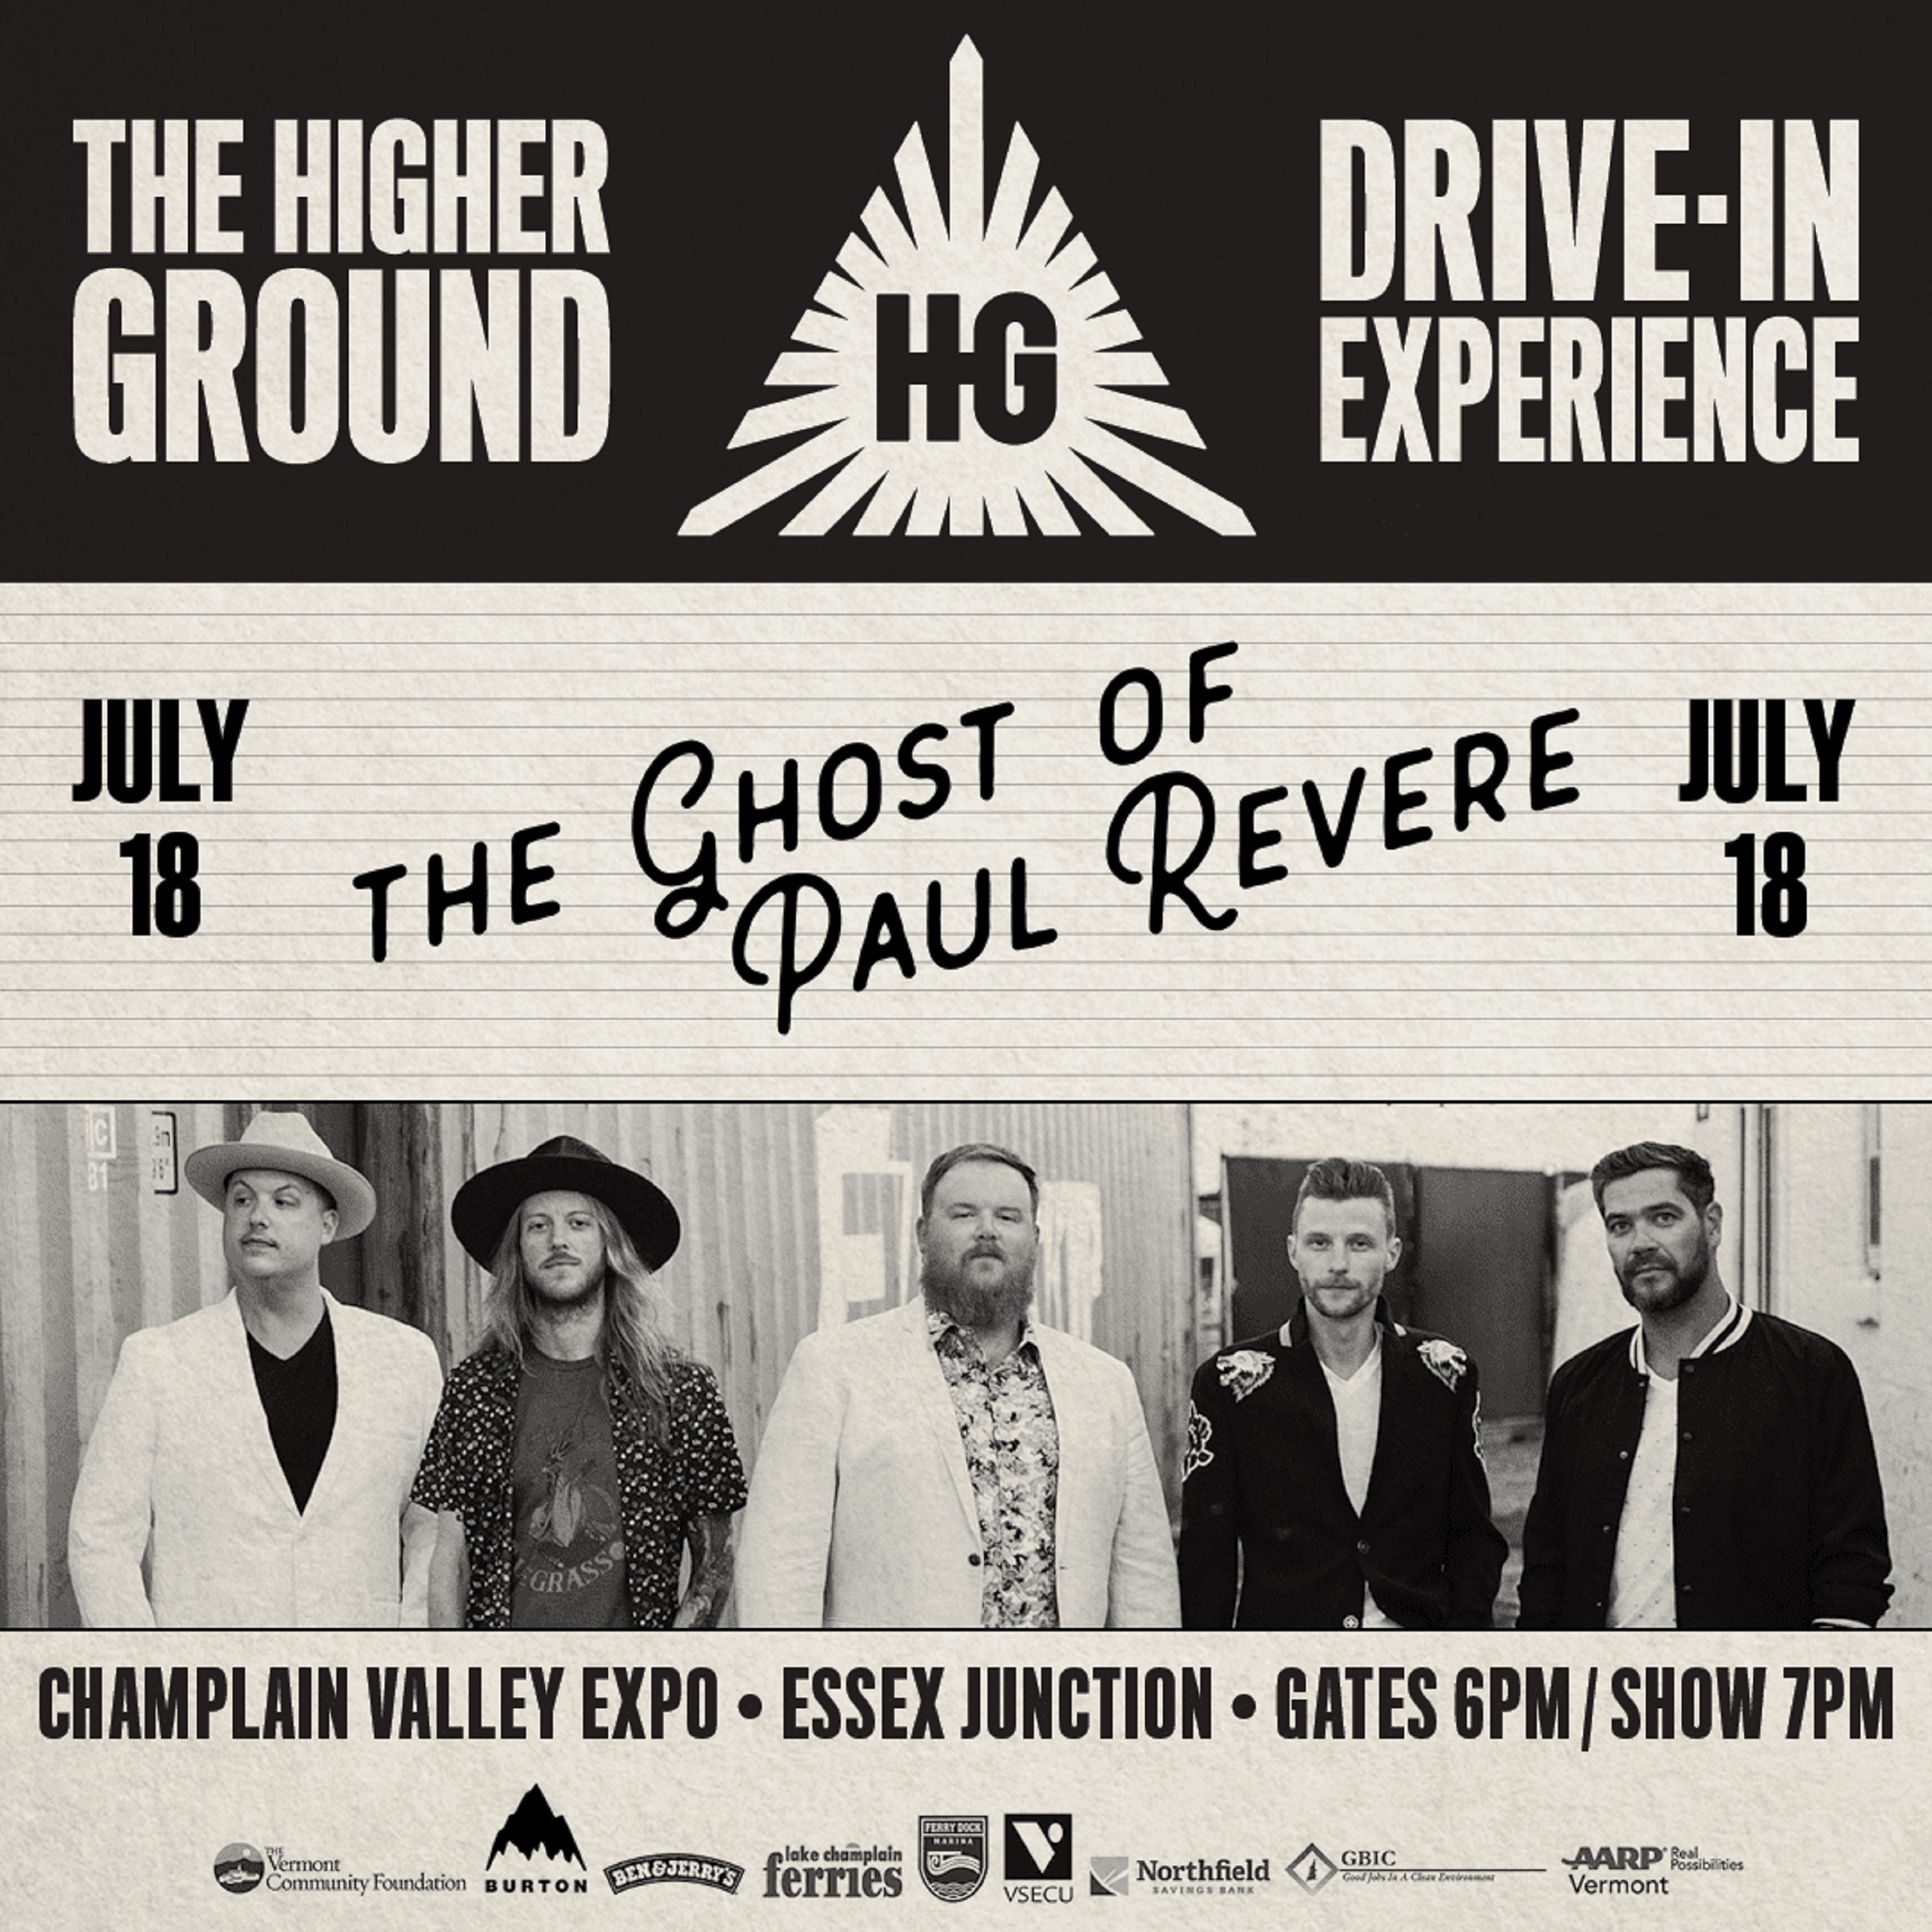 The Ghost of Paul Revere 7/18 at the HG Drive-In Experience